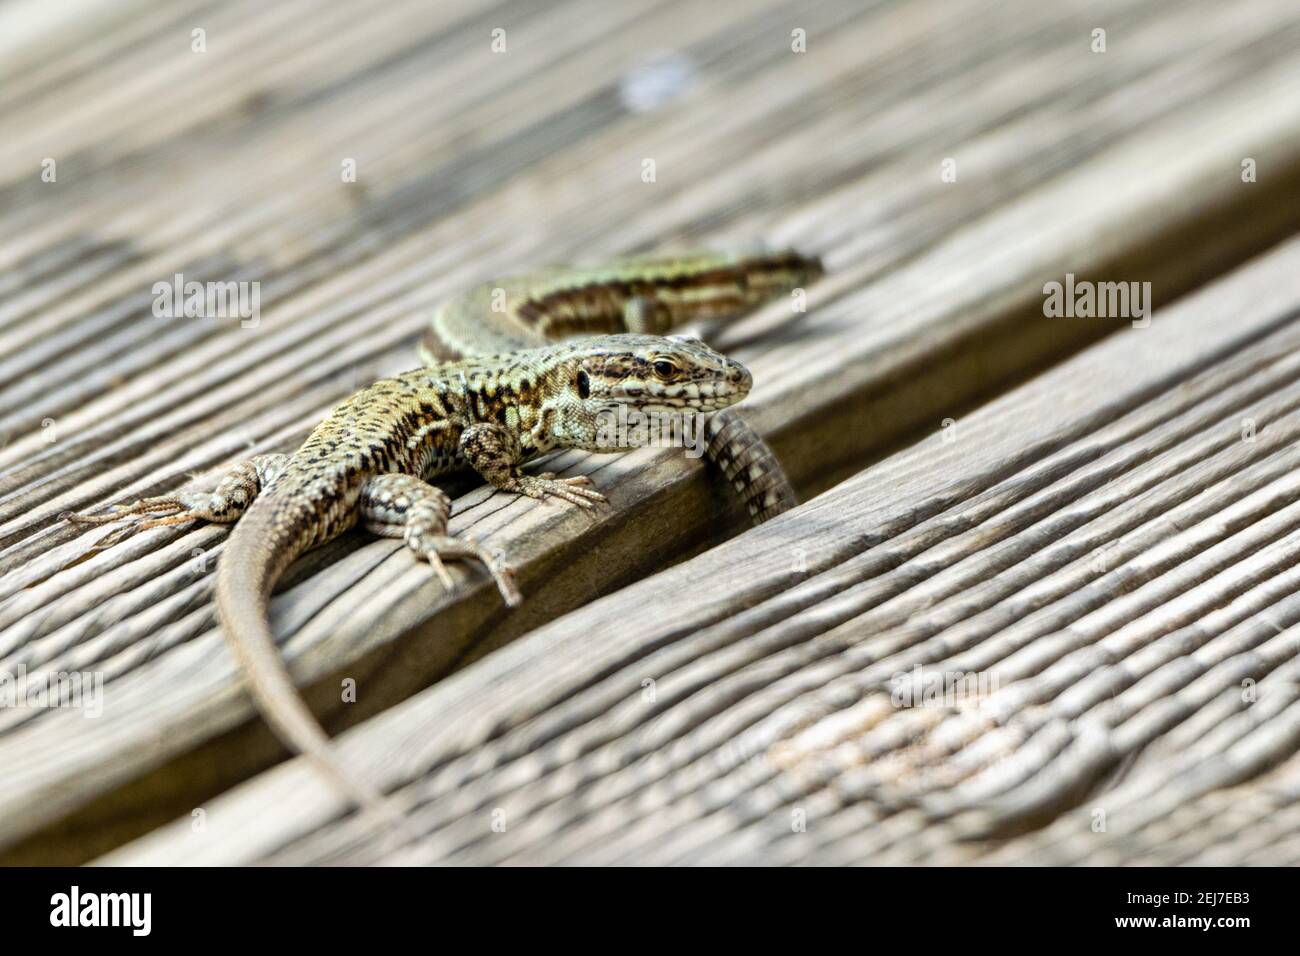 view of wall lizard on wooden board Stock Photo